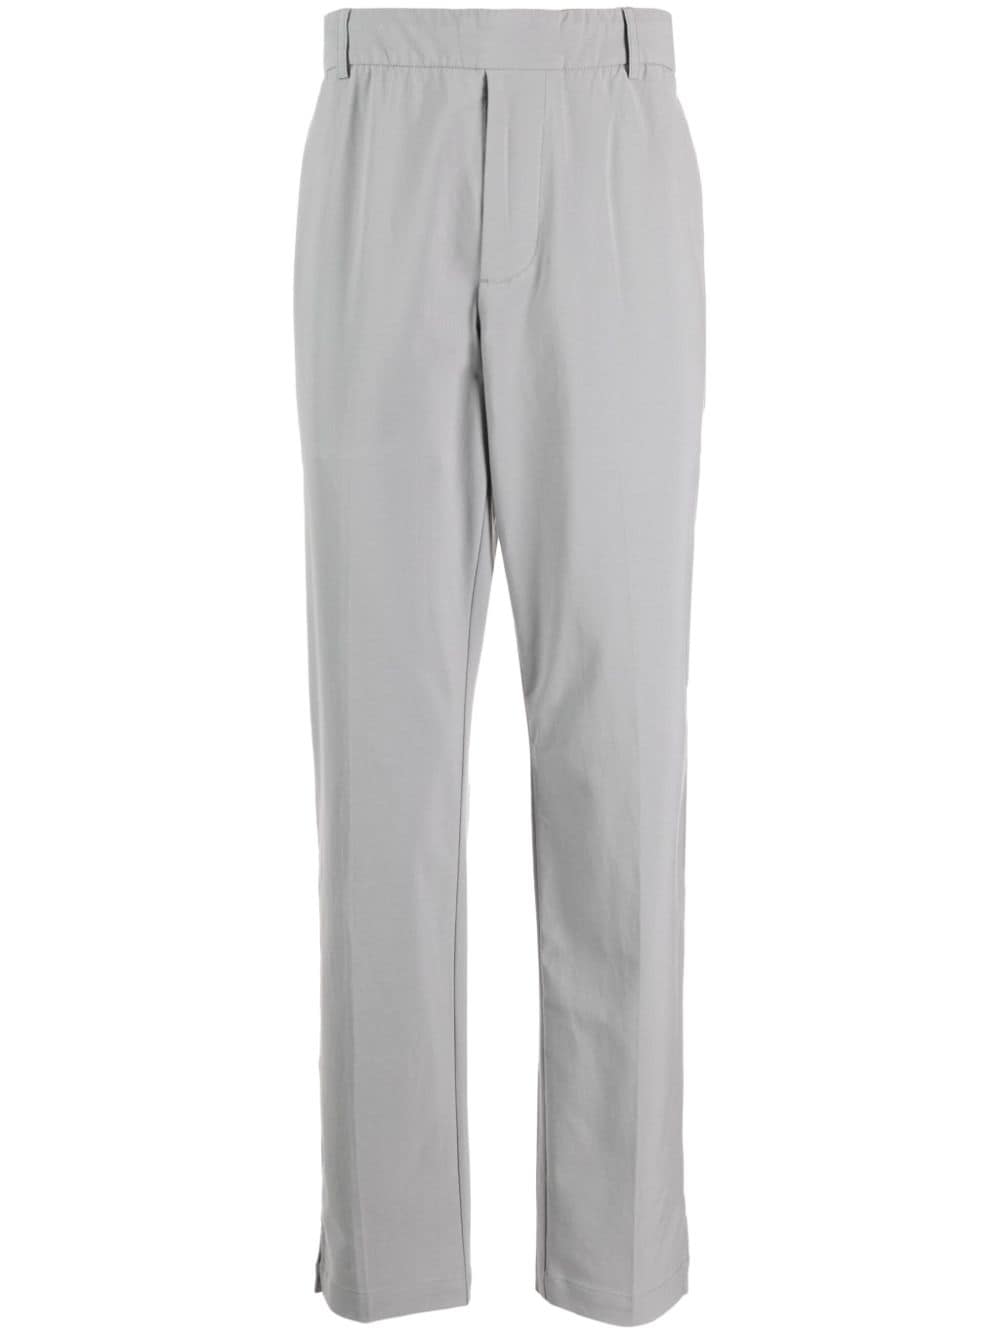 James Perse mid-rise tailored trousers - Grey von James Perse